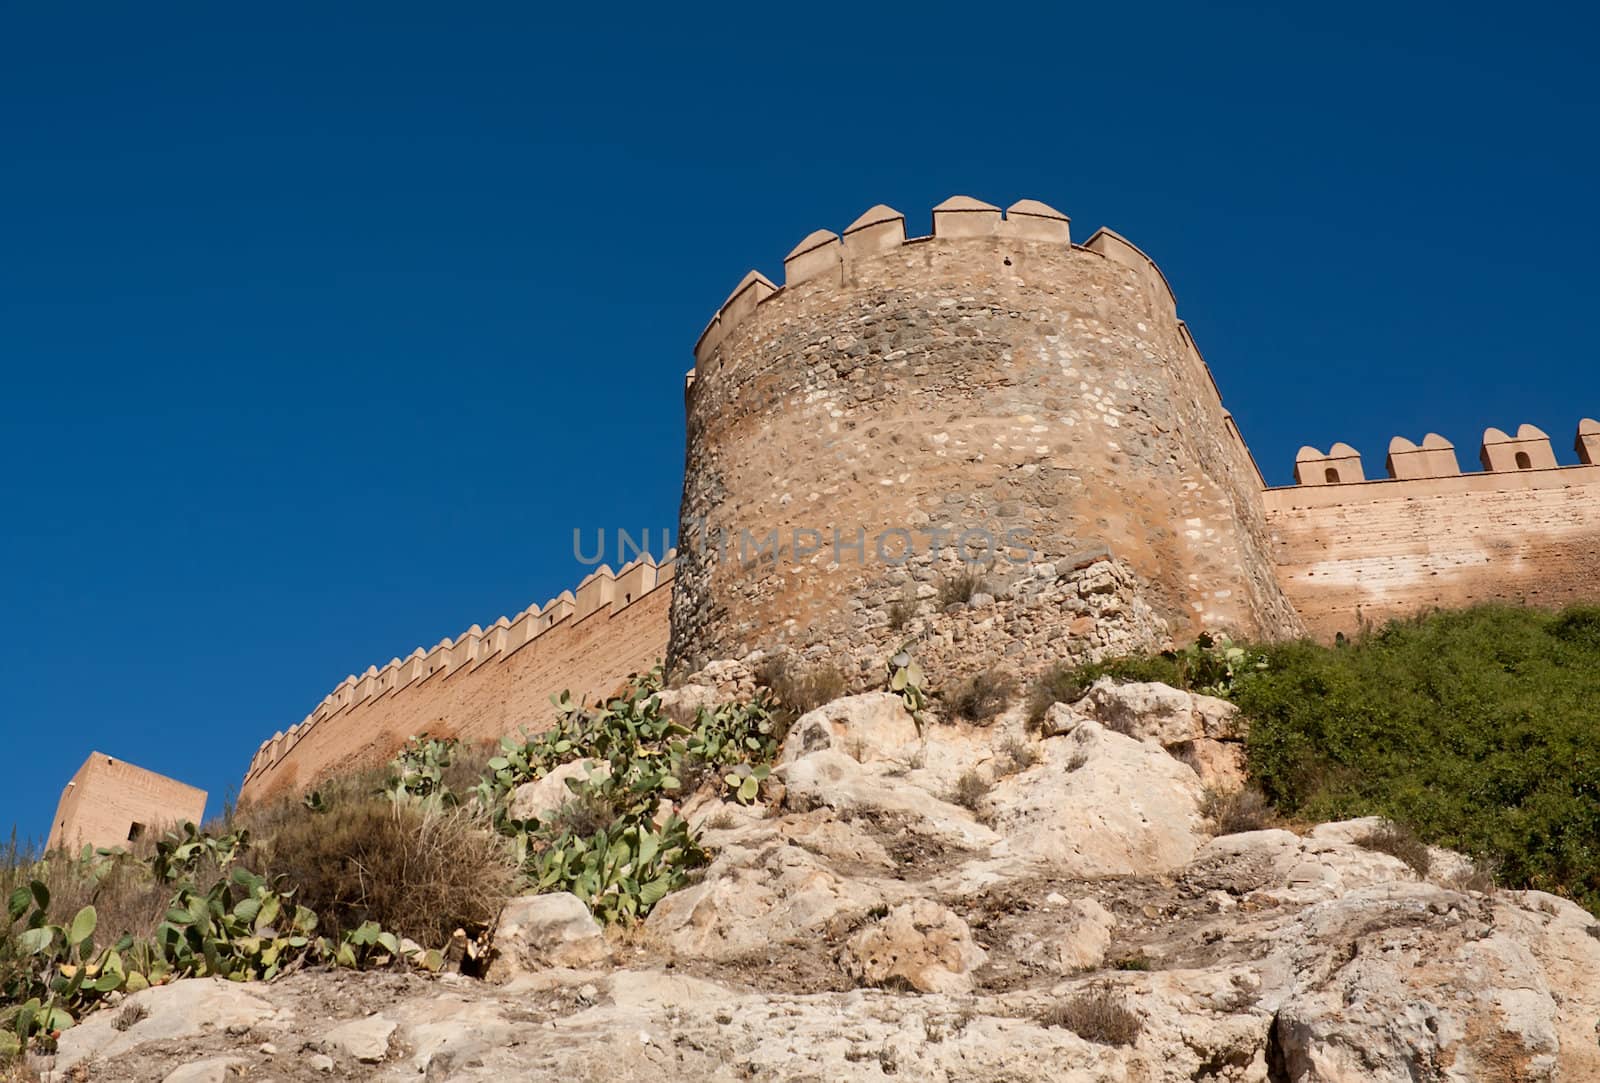 Embattled wall in the Alcazaba of Almeria, medieval Arabic fortress dating from the 10th century.